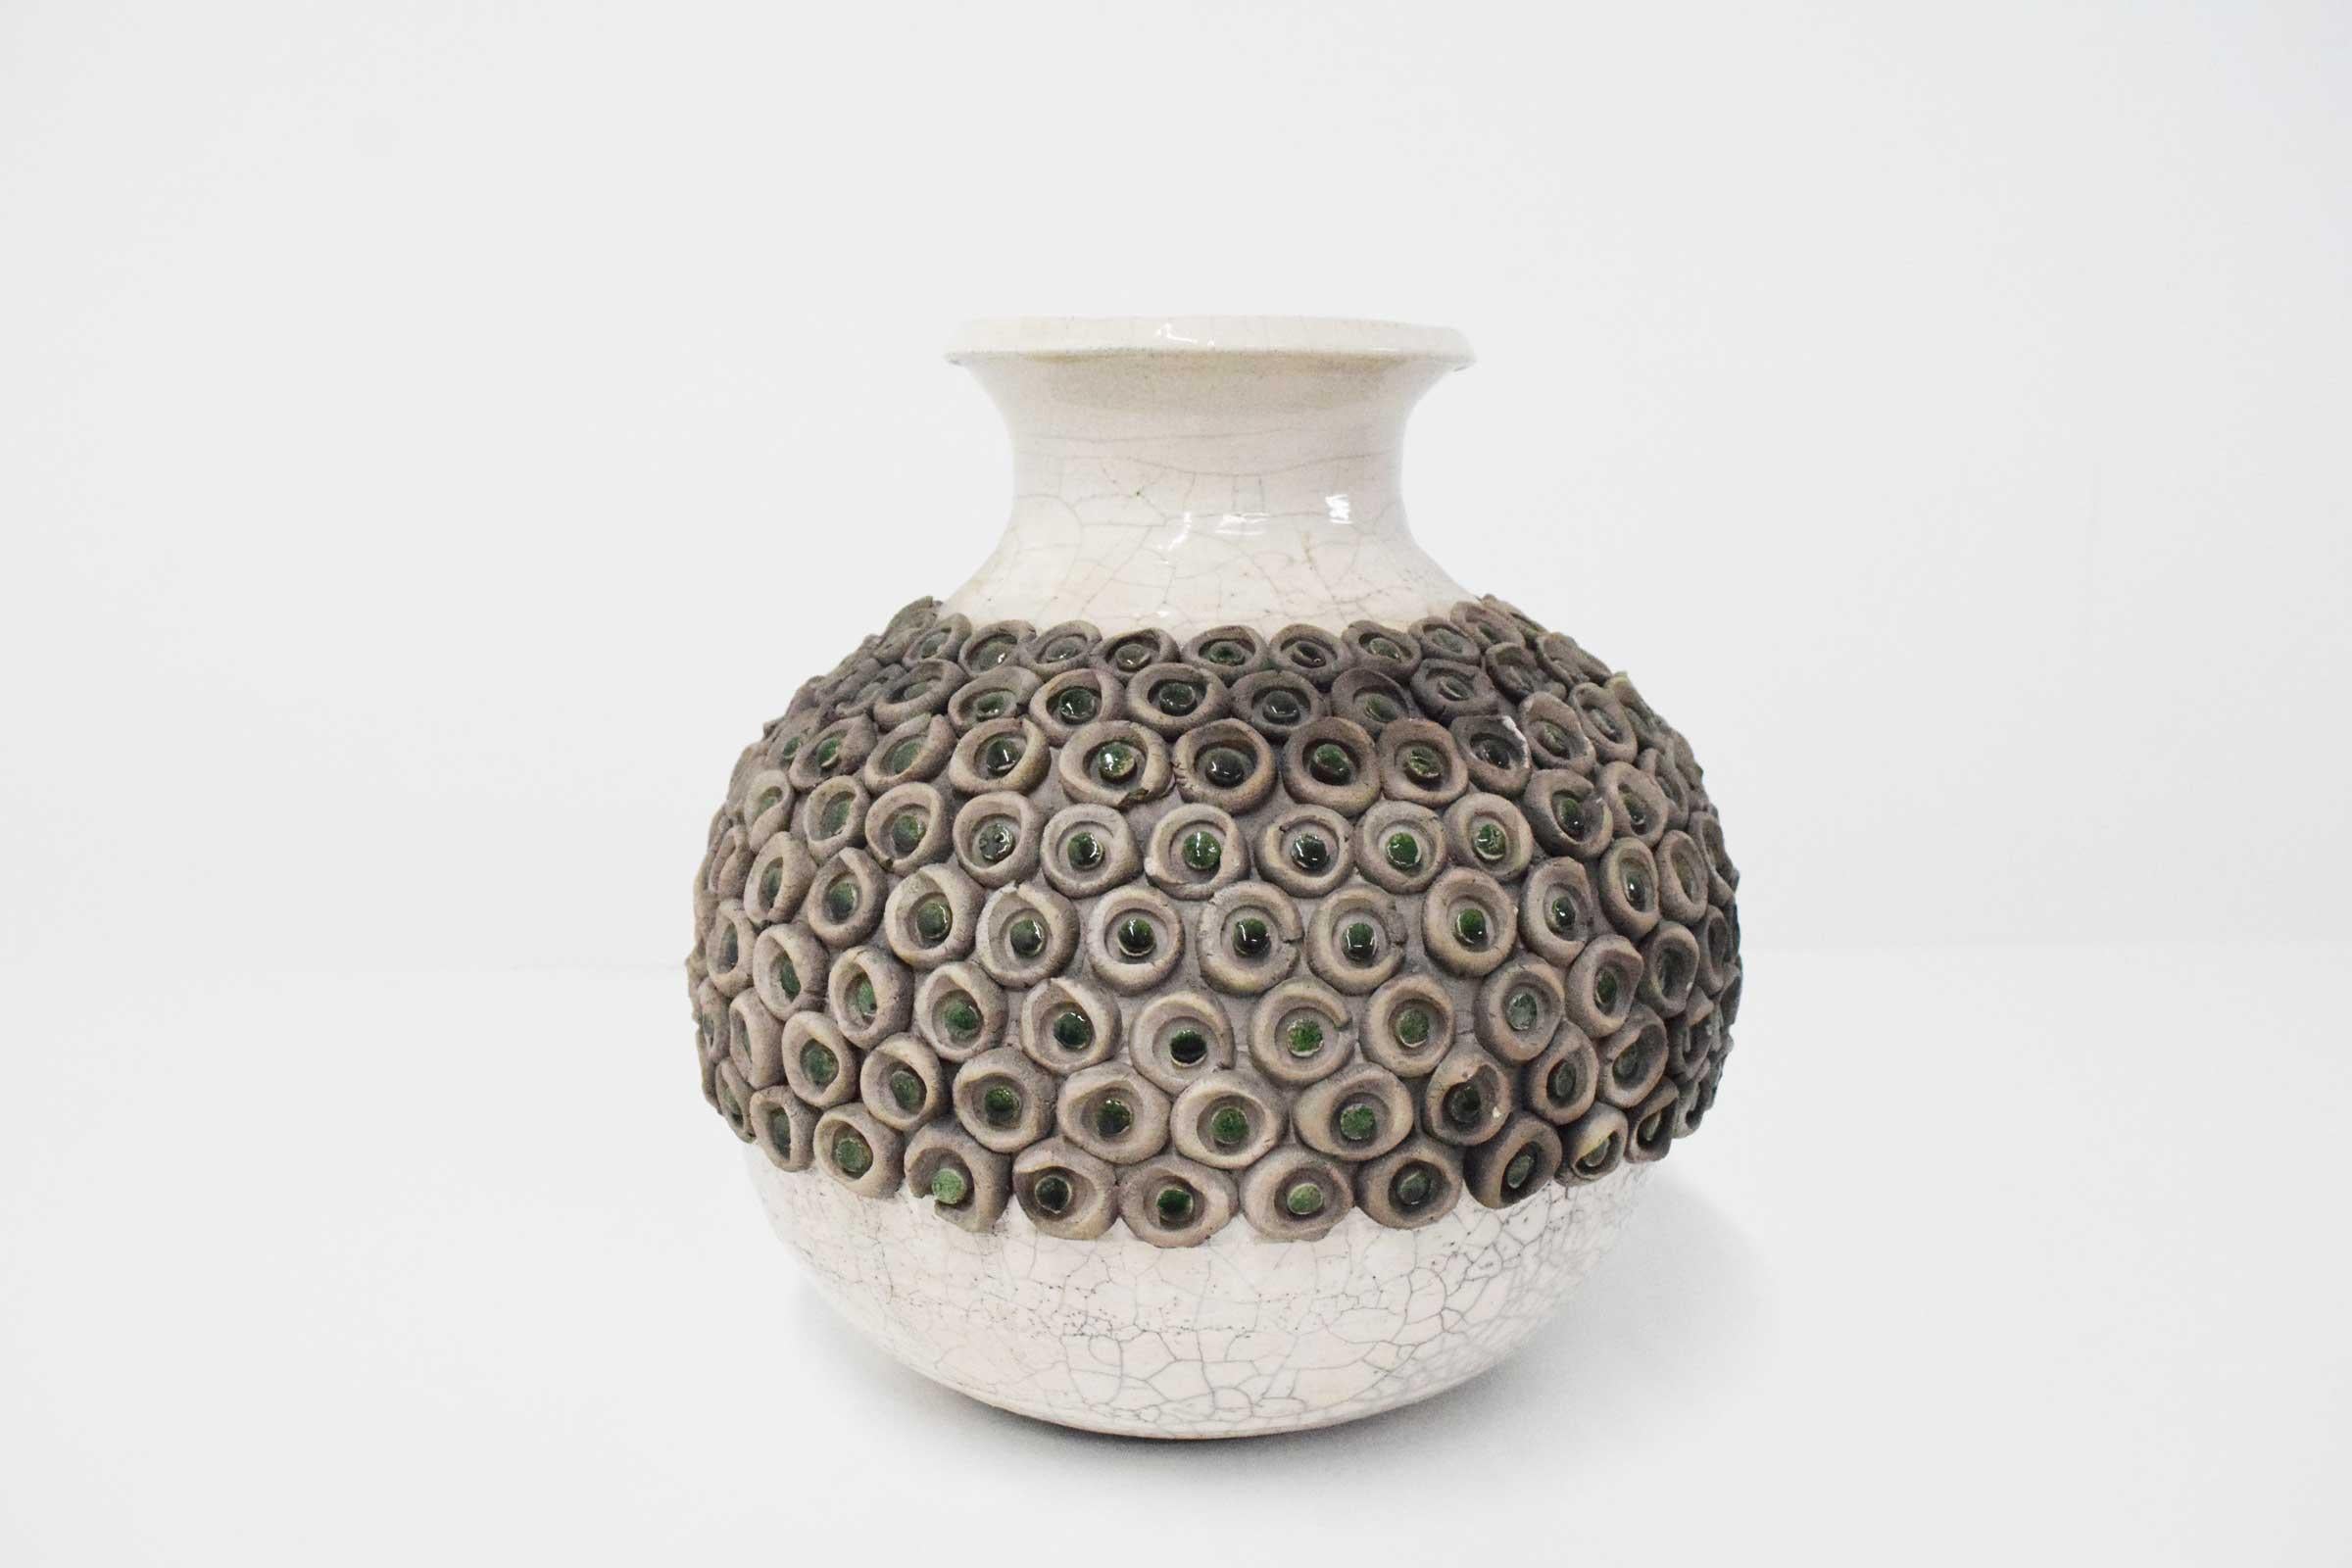 Lots of interesting detail in this beautiful Mid-Century Modern ceramic vase.  A glazed ceramic vase embellished circular ceramic circles adorned with green glazed ceramic dots. 